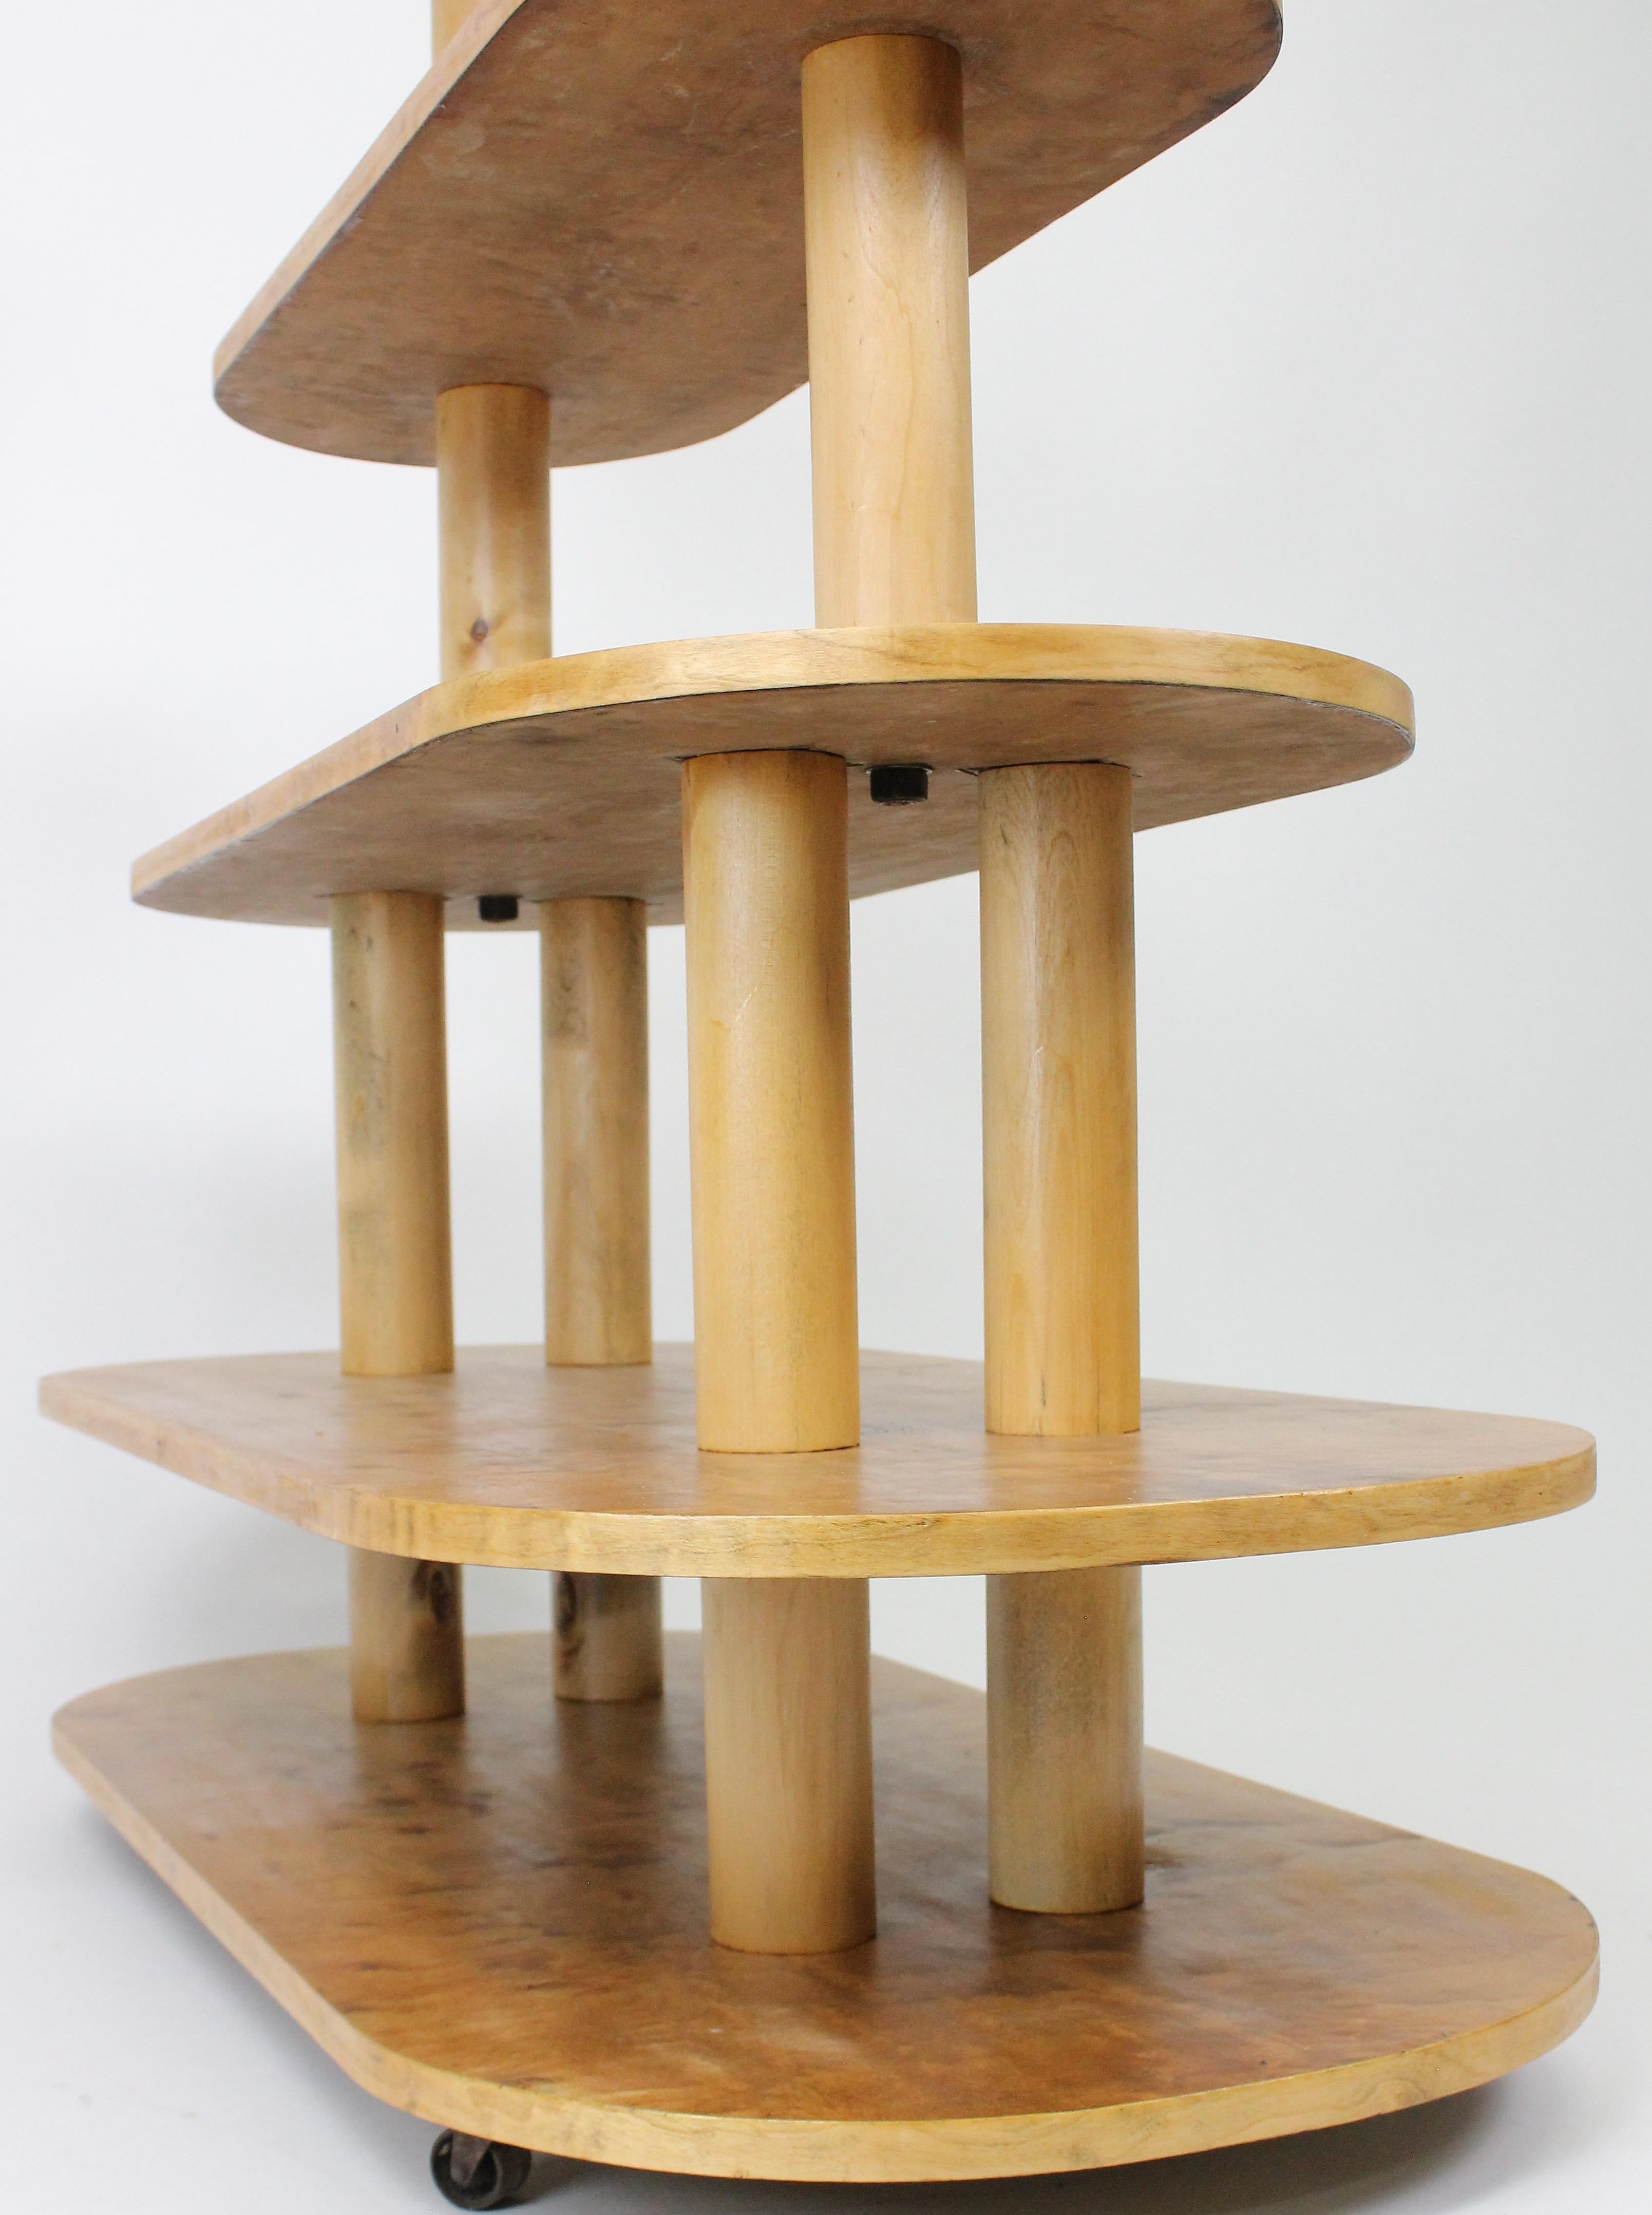 Mid-20th Century Swedish Modern Display Shelf or Étagère in Golden Birch, 1920s-1930s For Sale